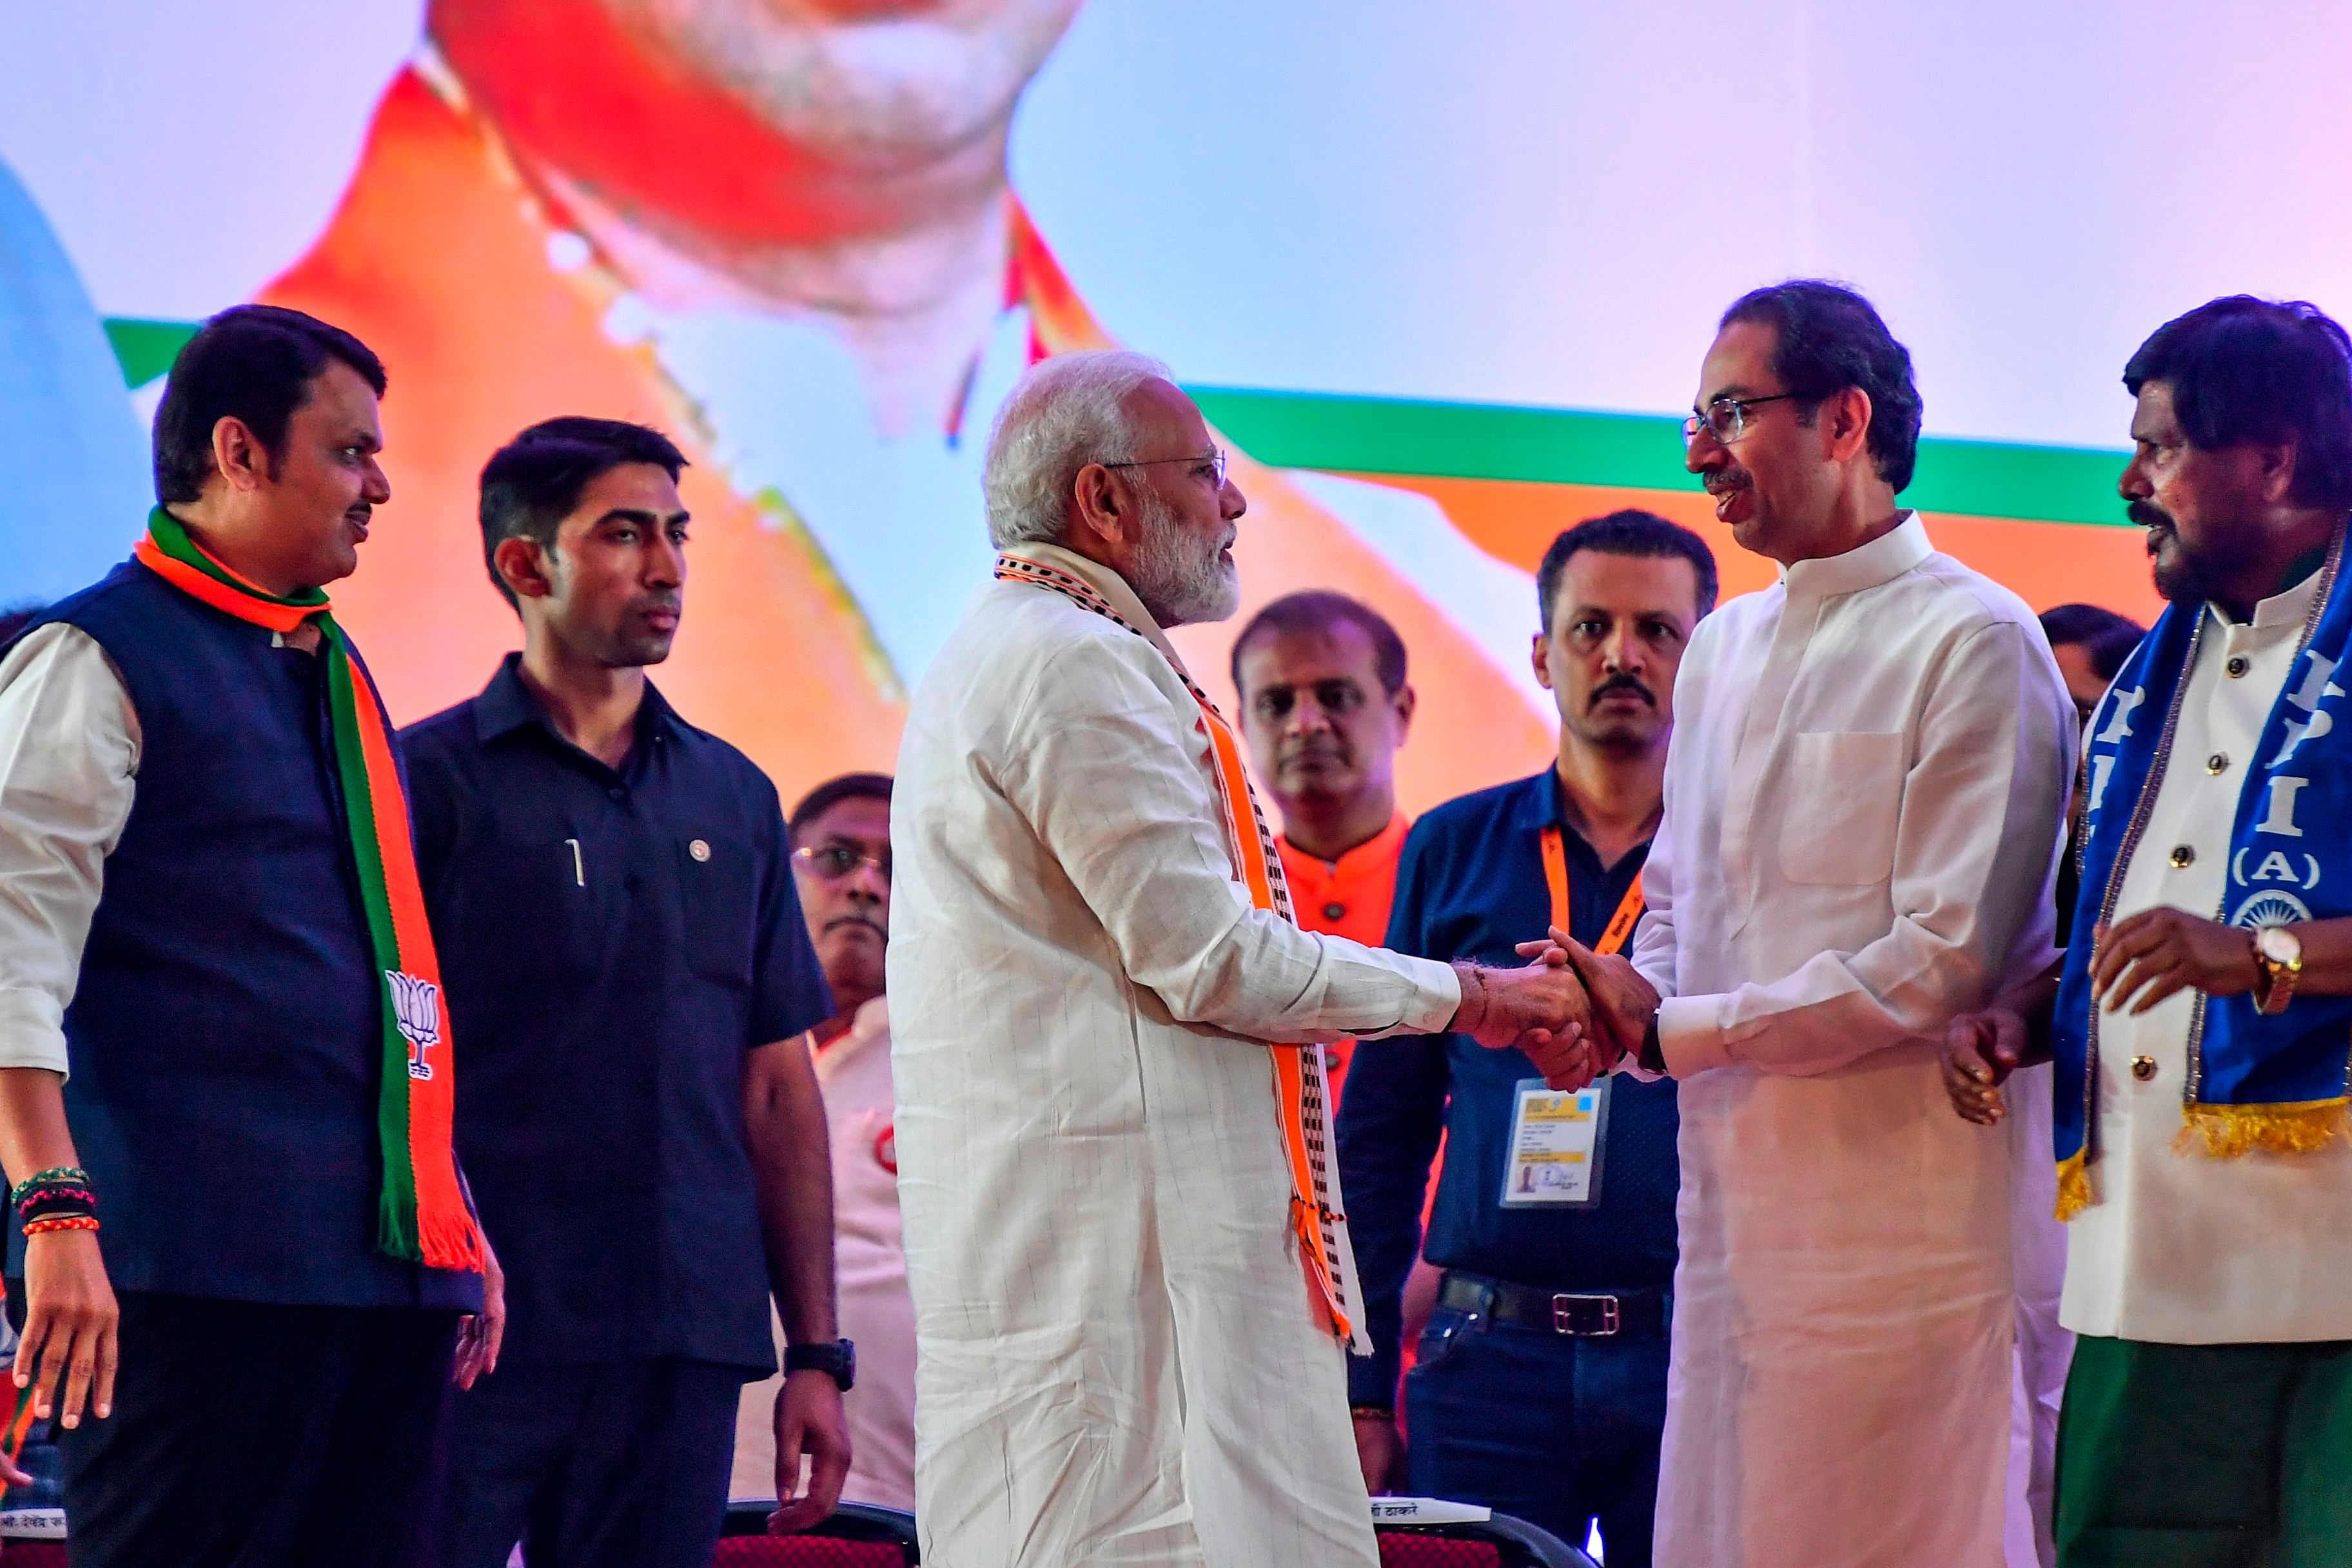 India's Prime Minister Narendra Modi (C) shakes hands with Hindu right-wing party Shiv Sena Chief Uddhav Thackeray (2R) as they attend a public rally in the run up to the Maharashtra. (AFP Photo)